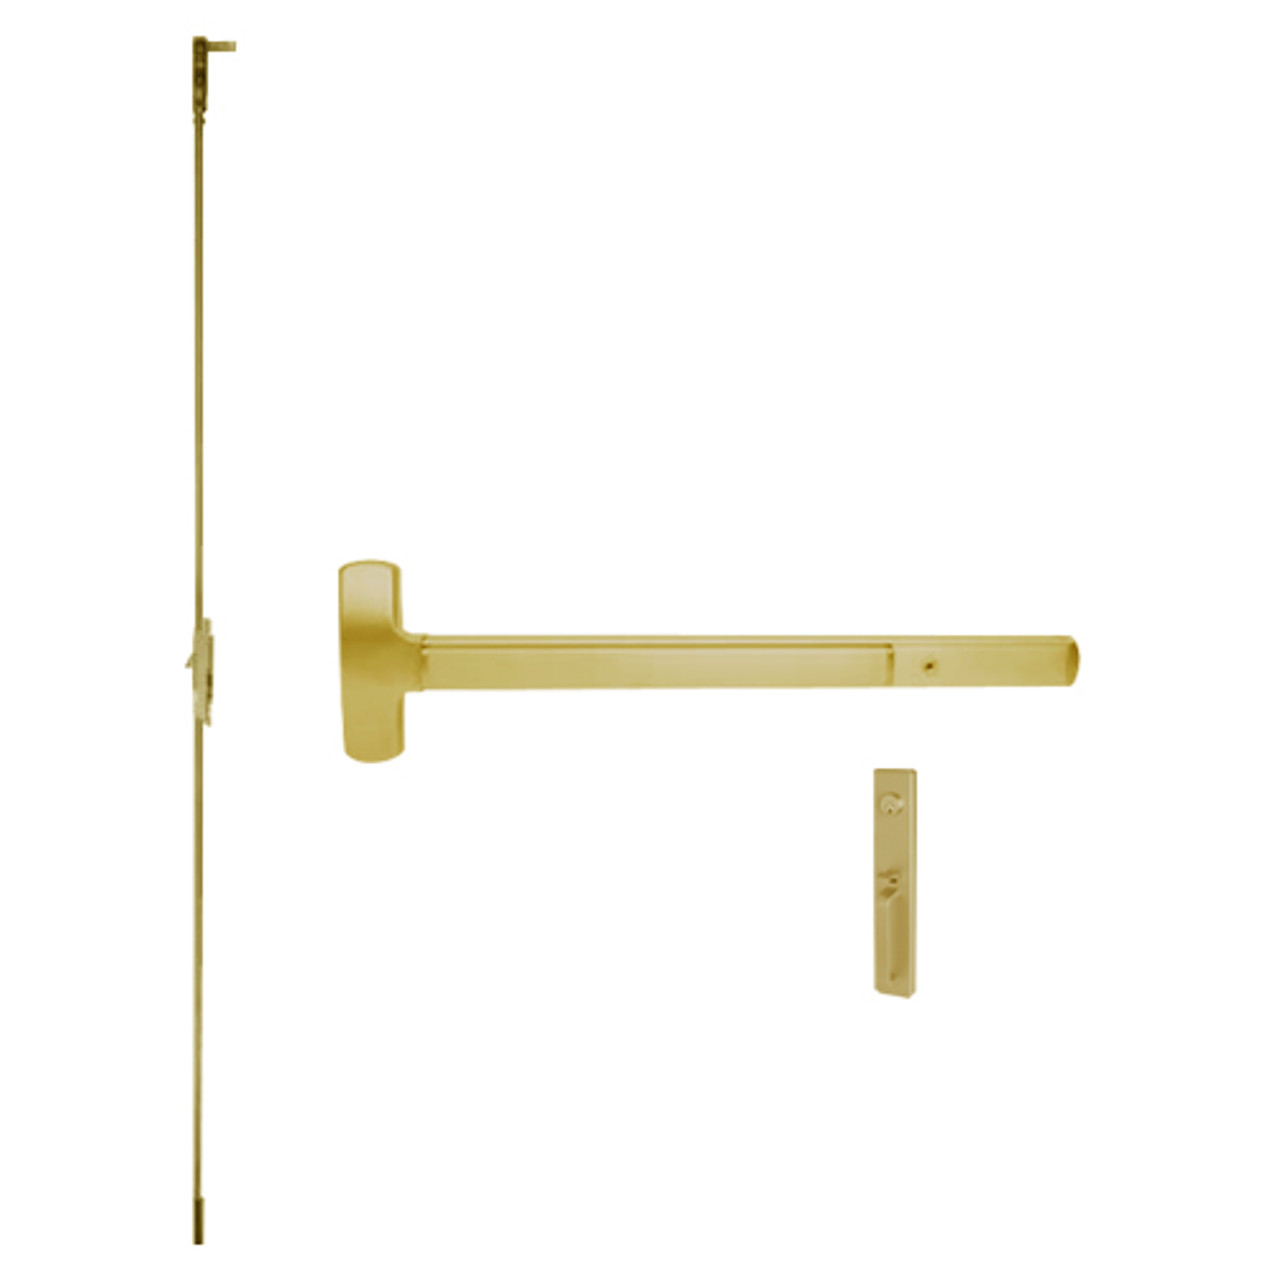 25-C-TP-US4-2 Falcon Exit Device in Satin Brass